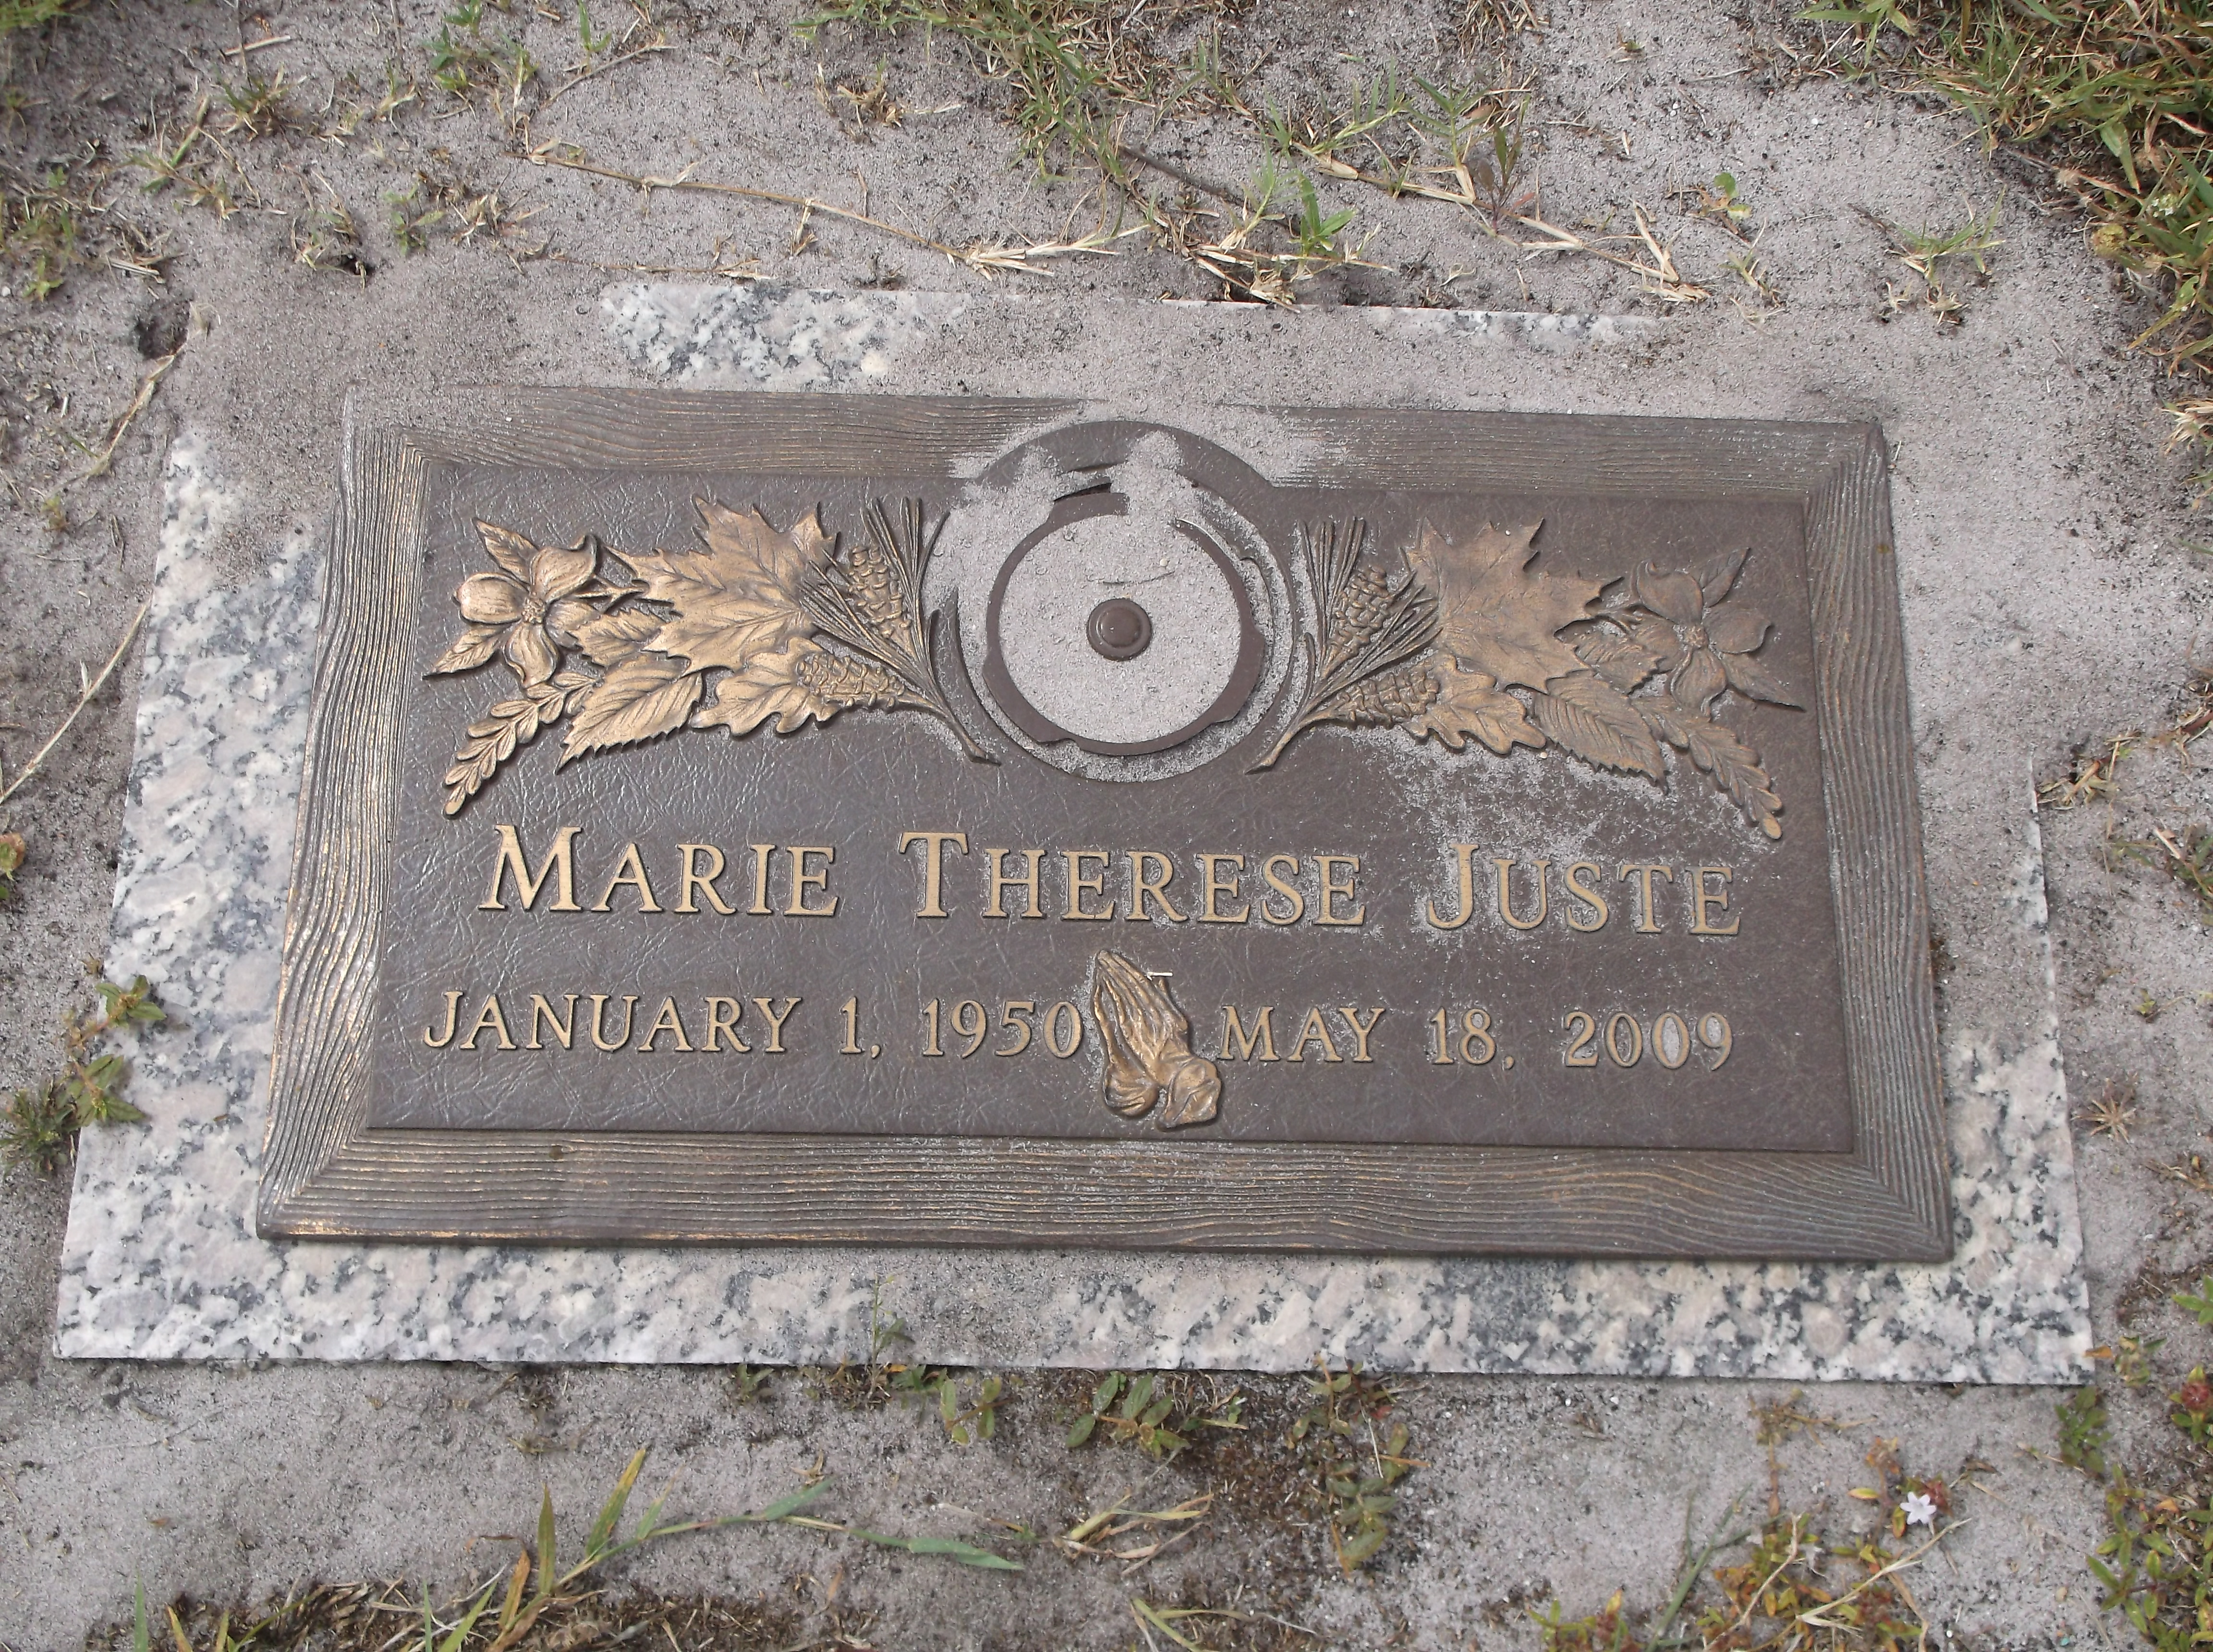 Marie Therese Juste